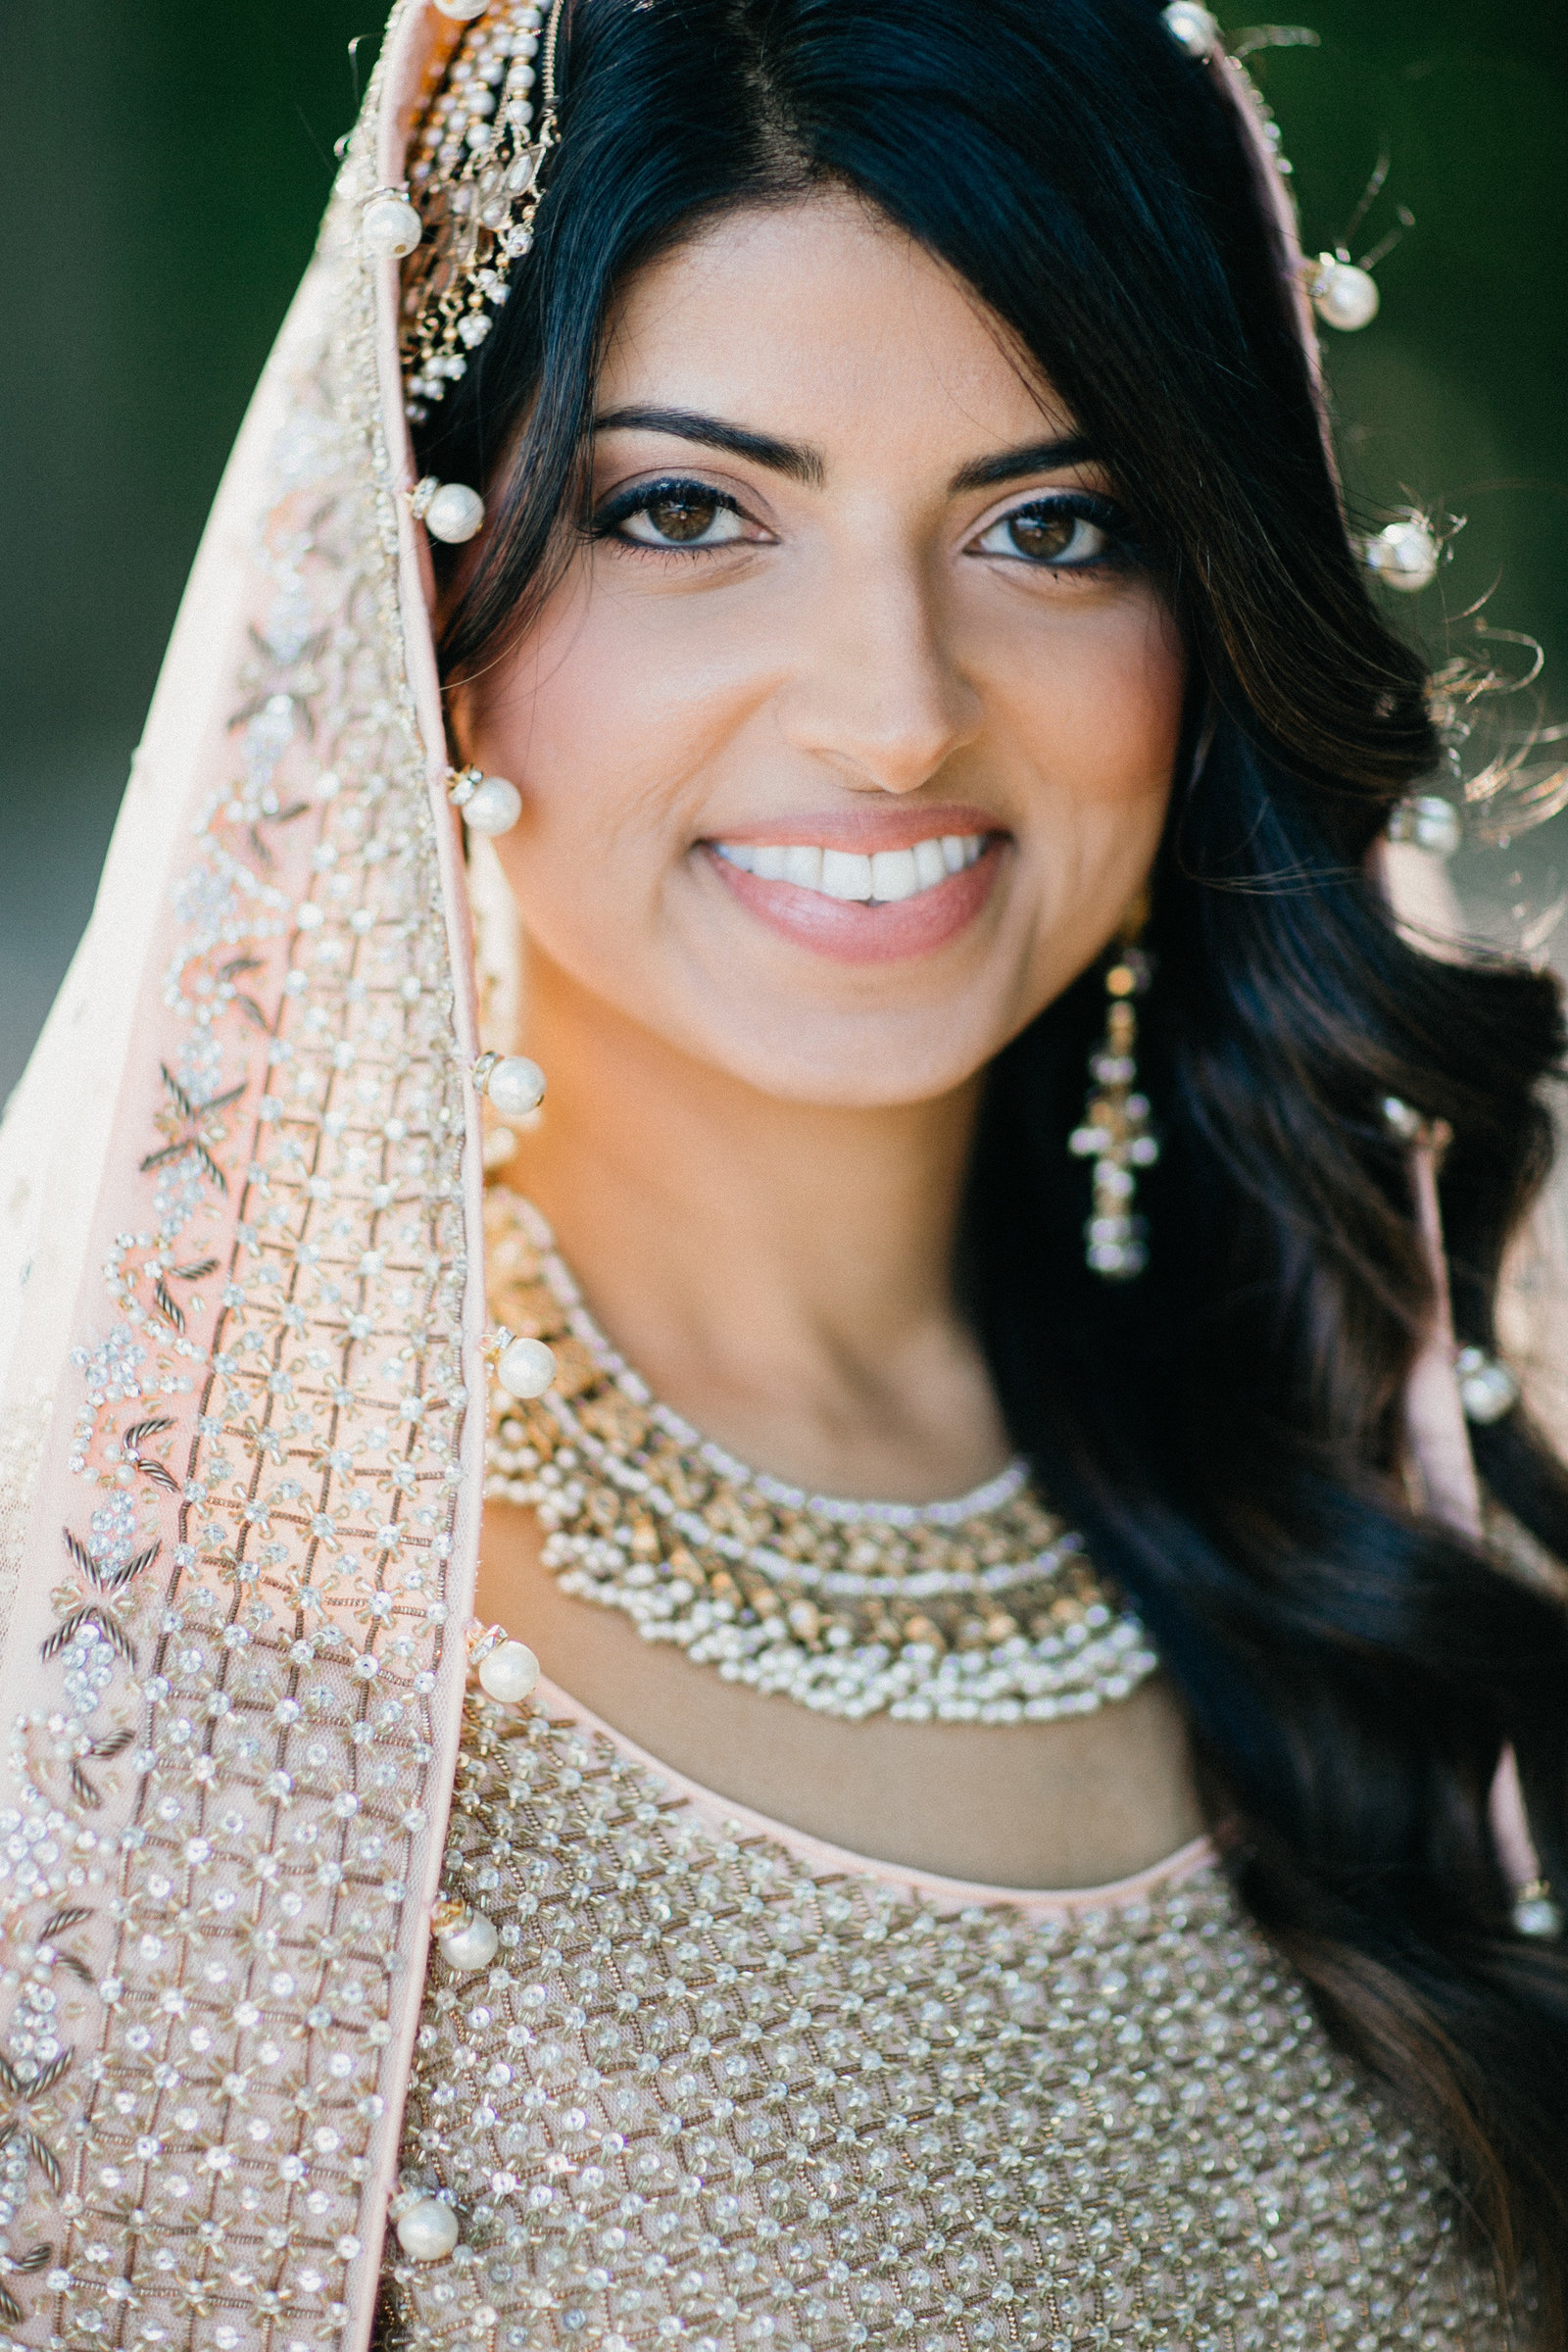 Our beautiful bride looked stunning on day 1 of this two day Indian - American Wedding celebration.